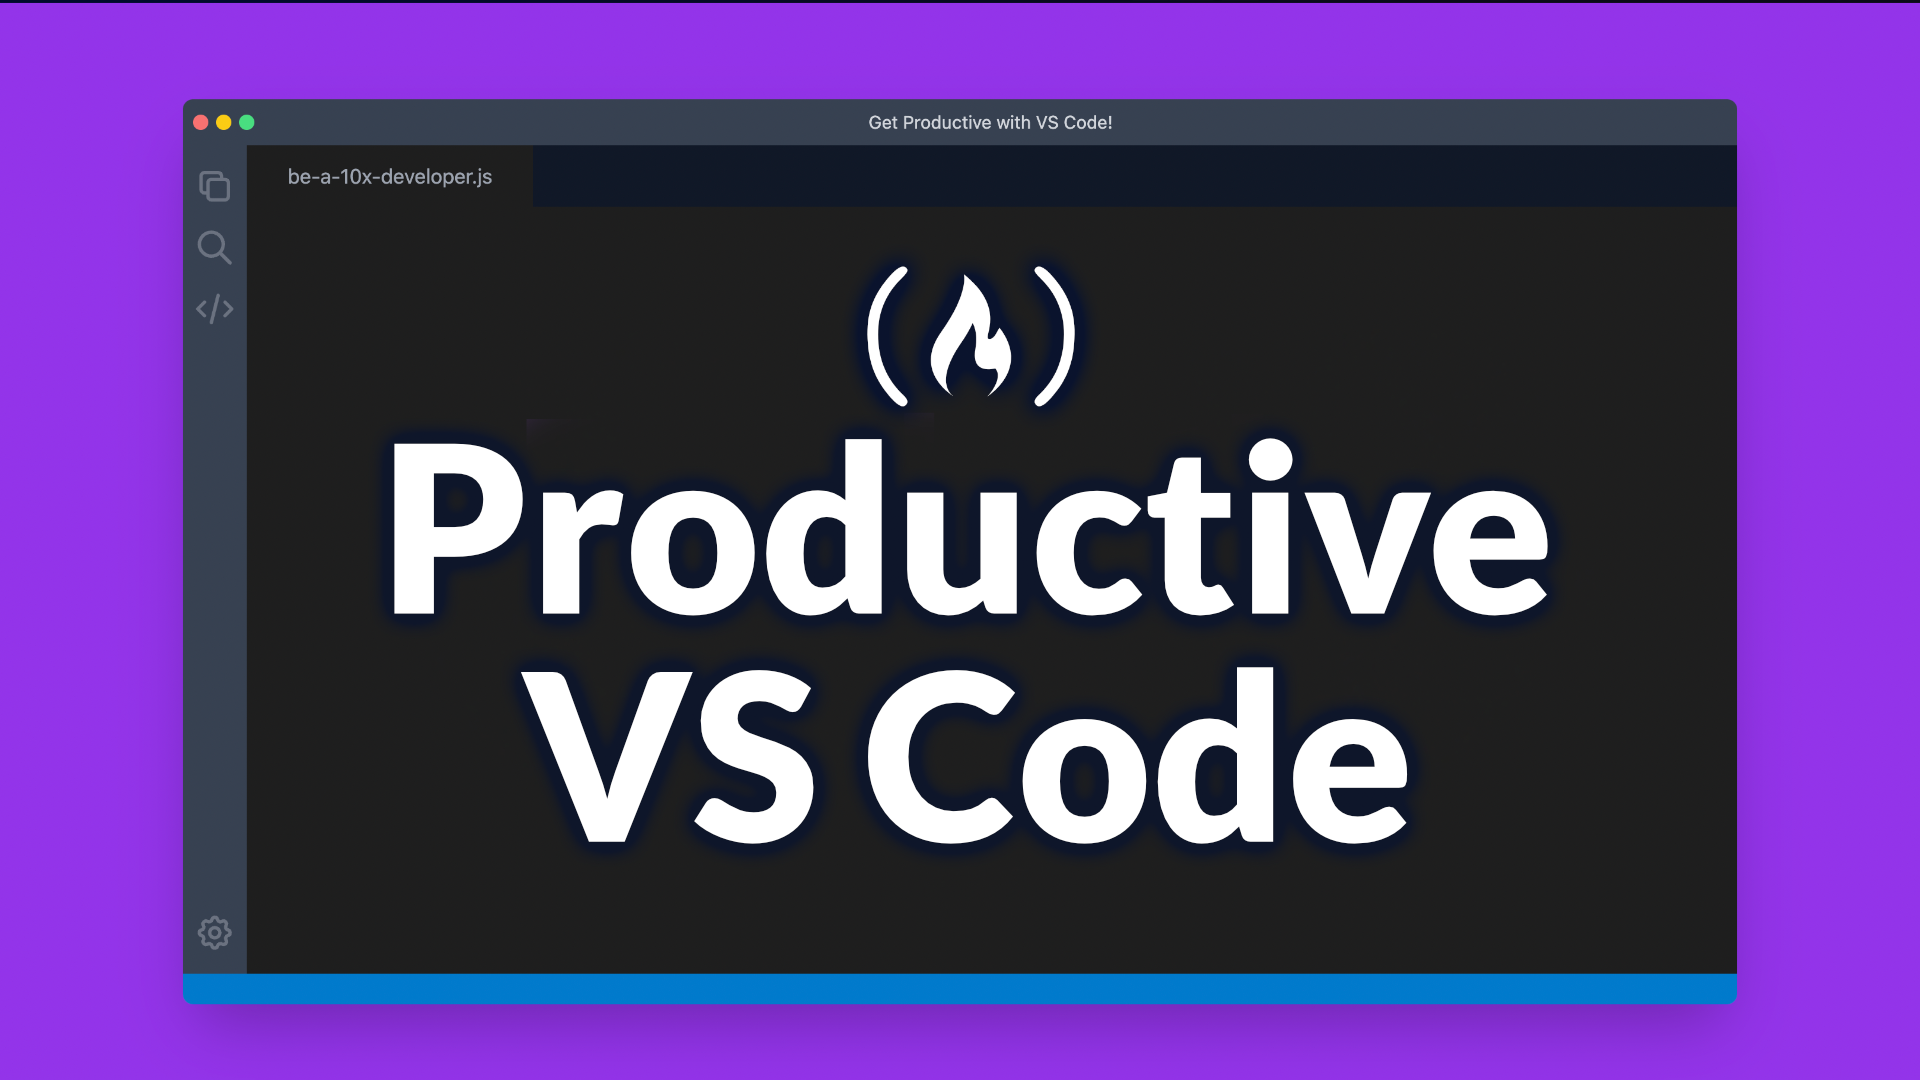 Image for Increase Your VS Code Productivity